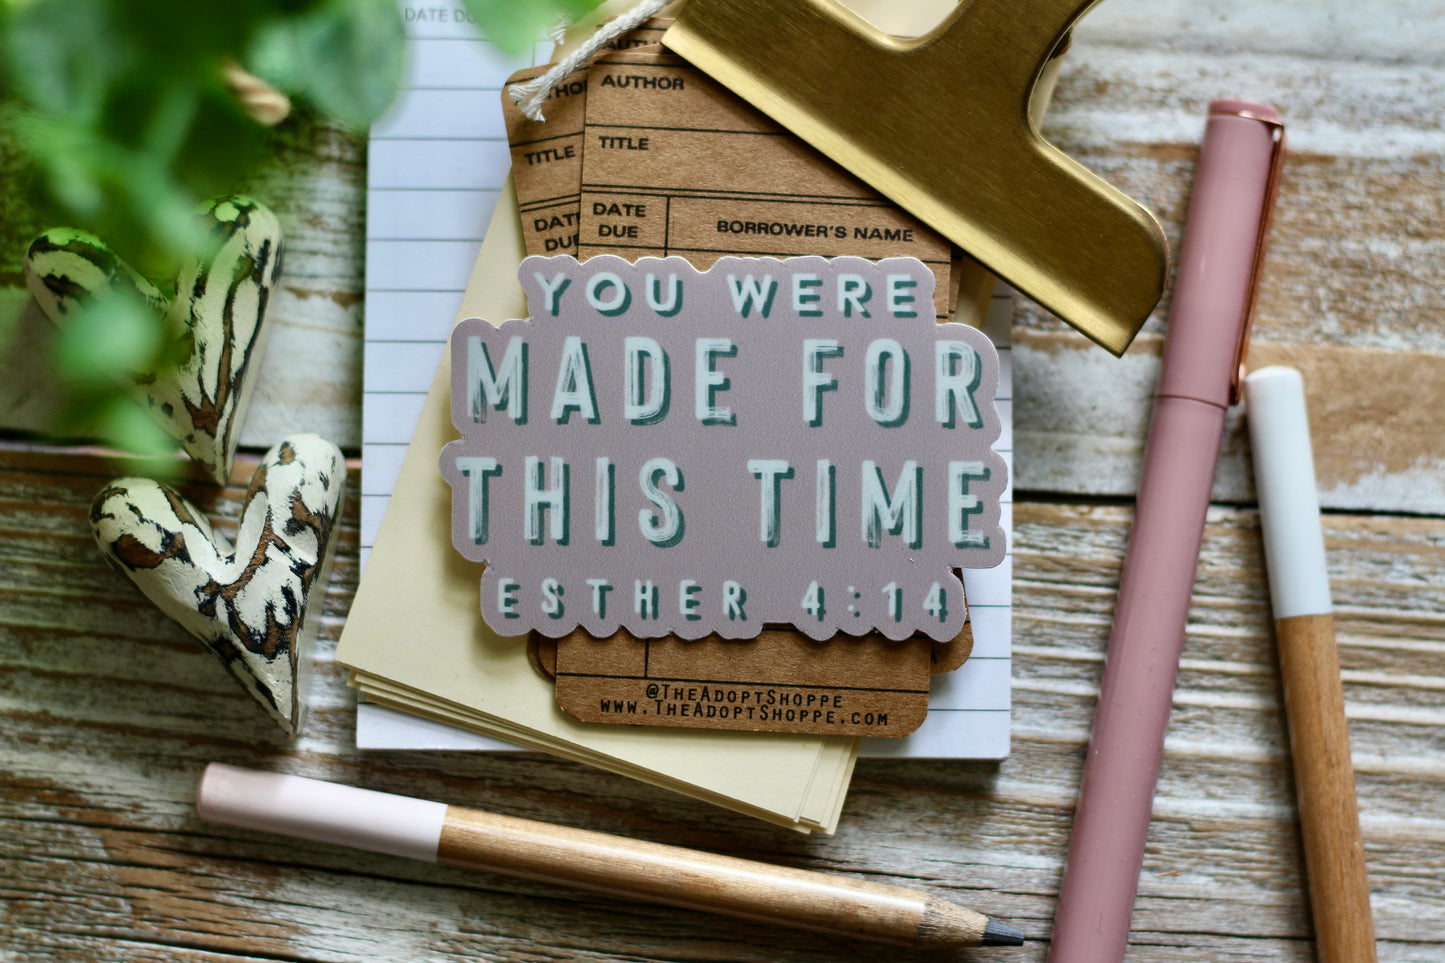 you were made for this time (Esther 4:14) vinyl sticker